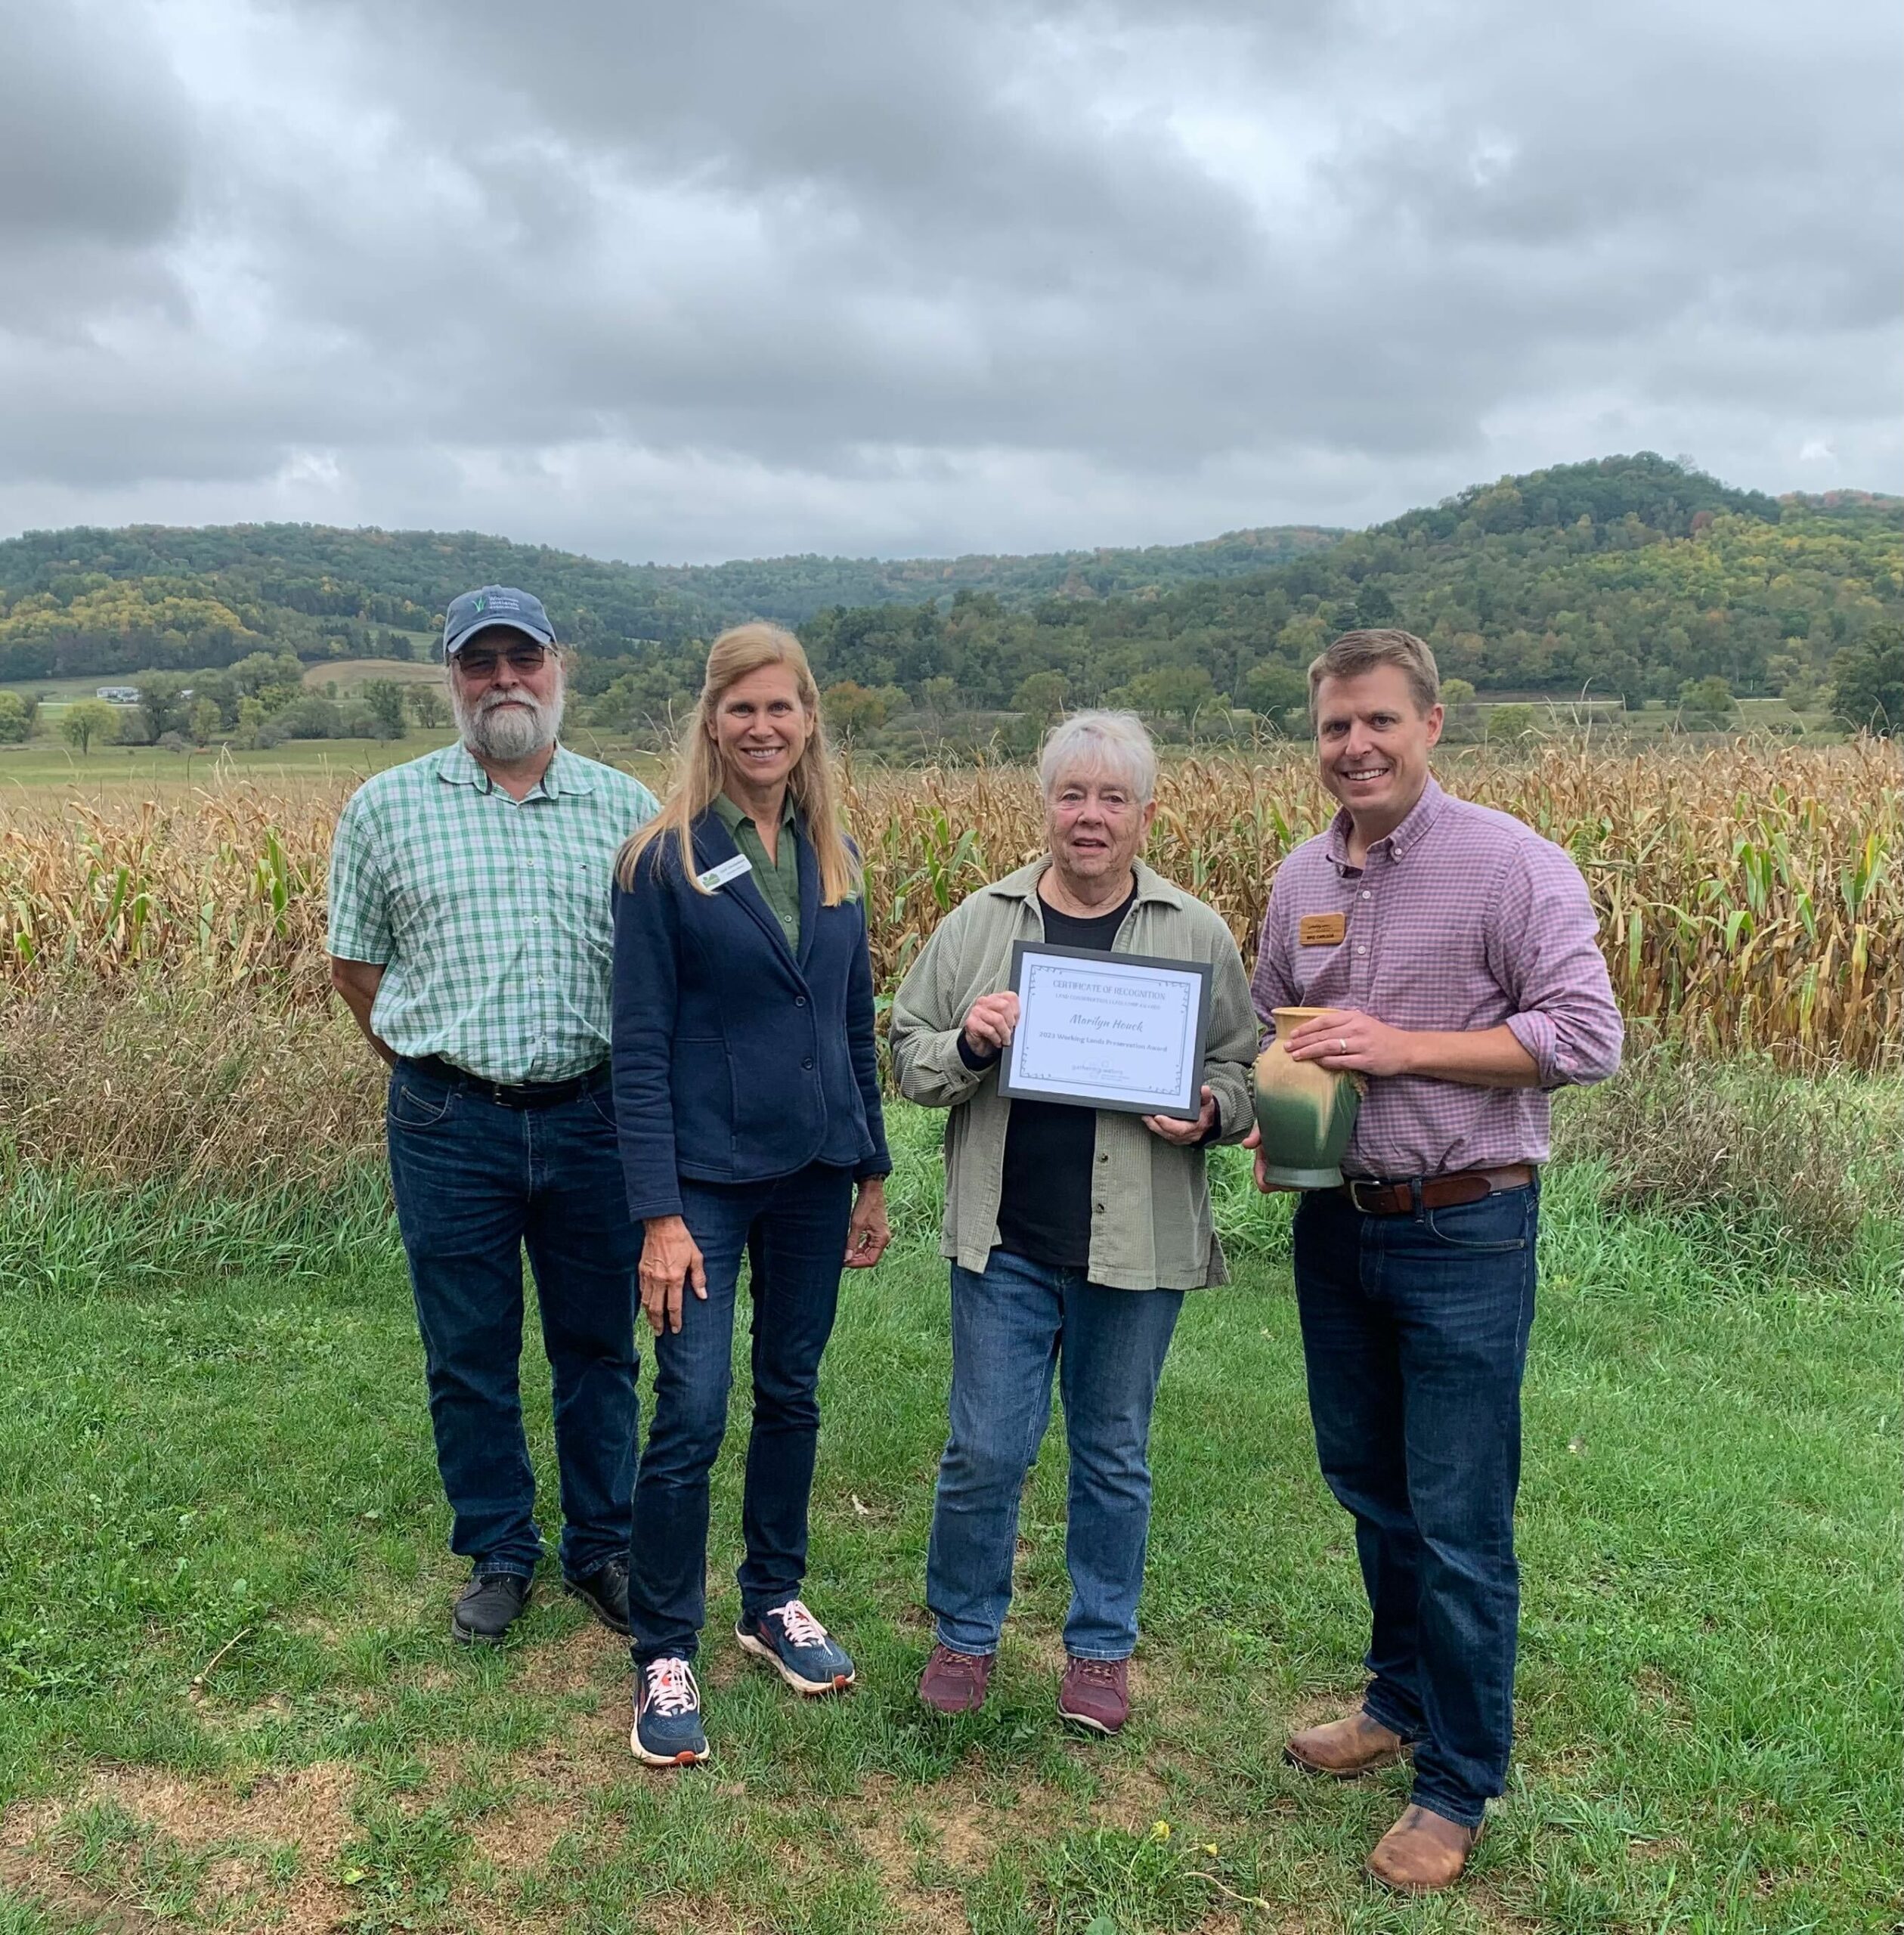 Four adults standing outside in a field on a cloudy day for an award presentation.